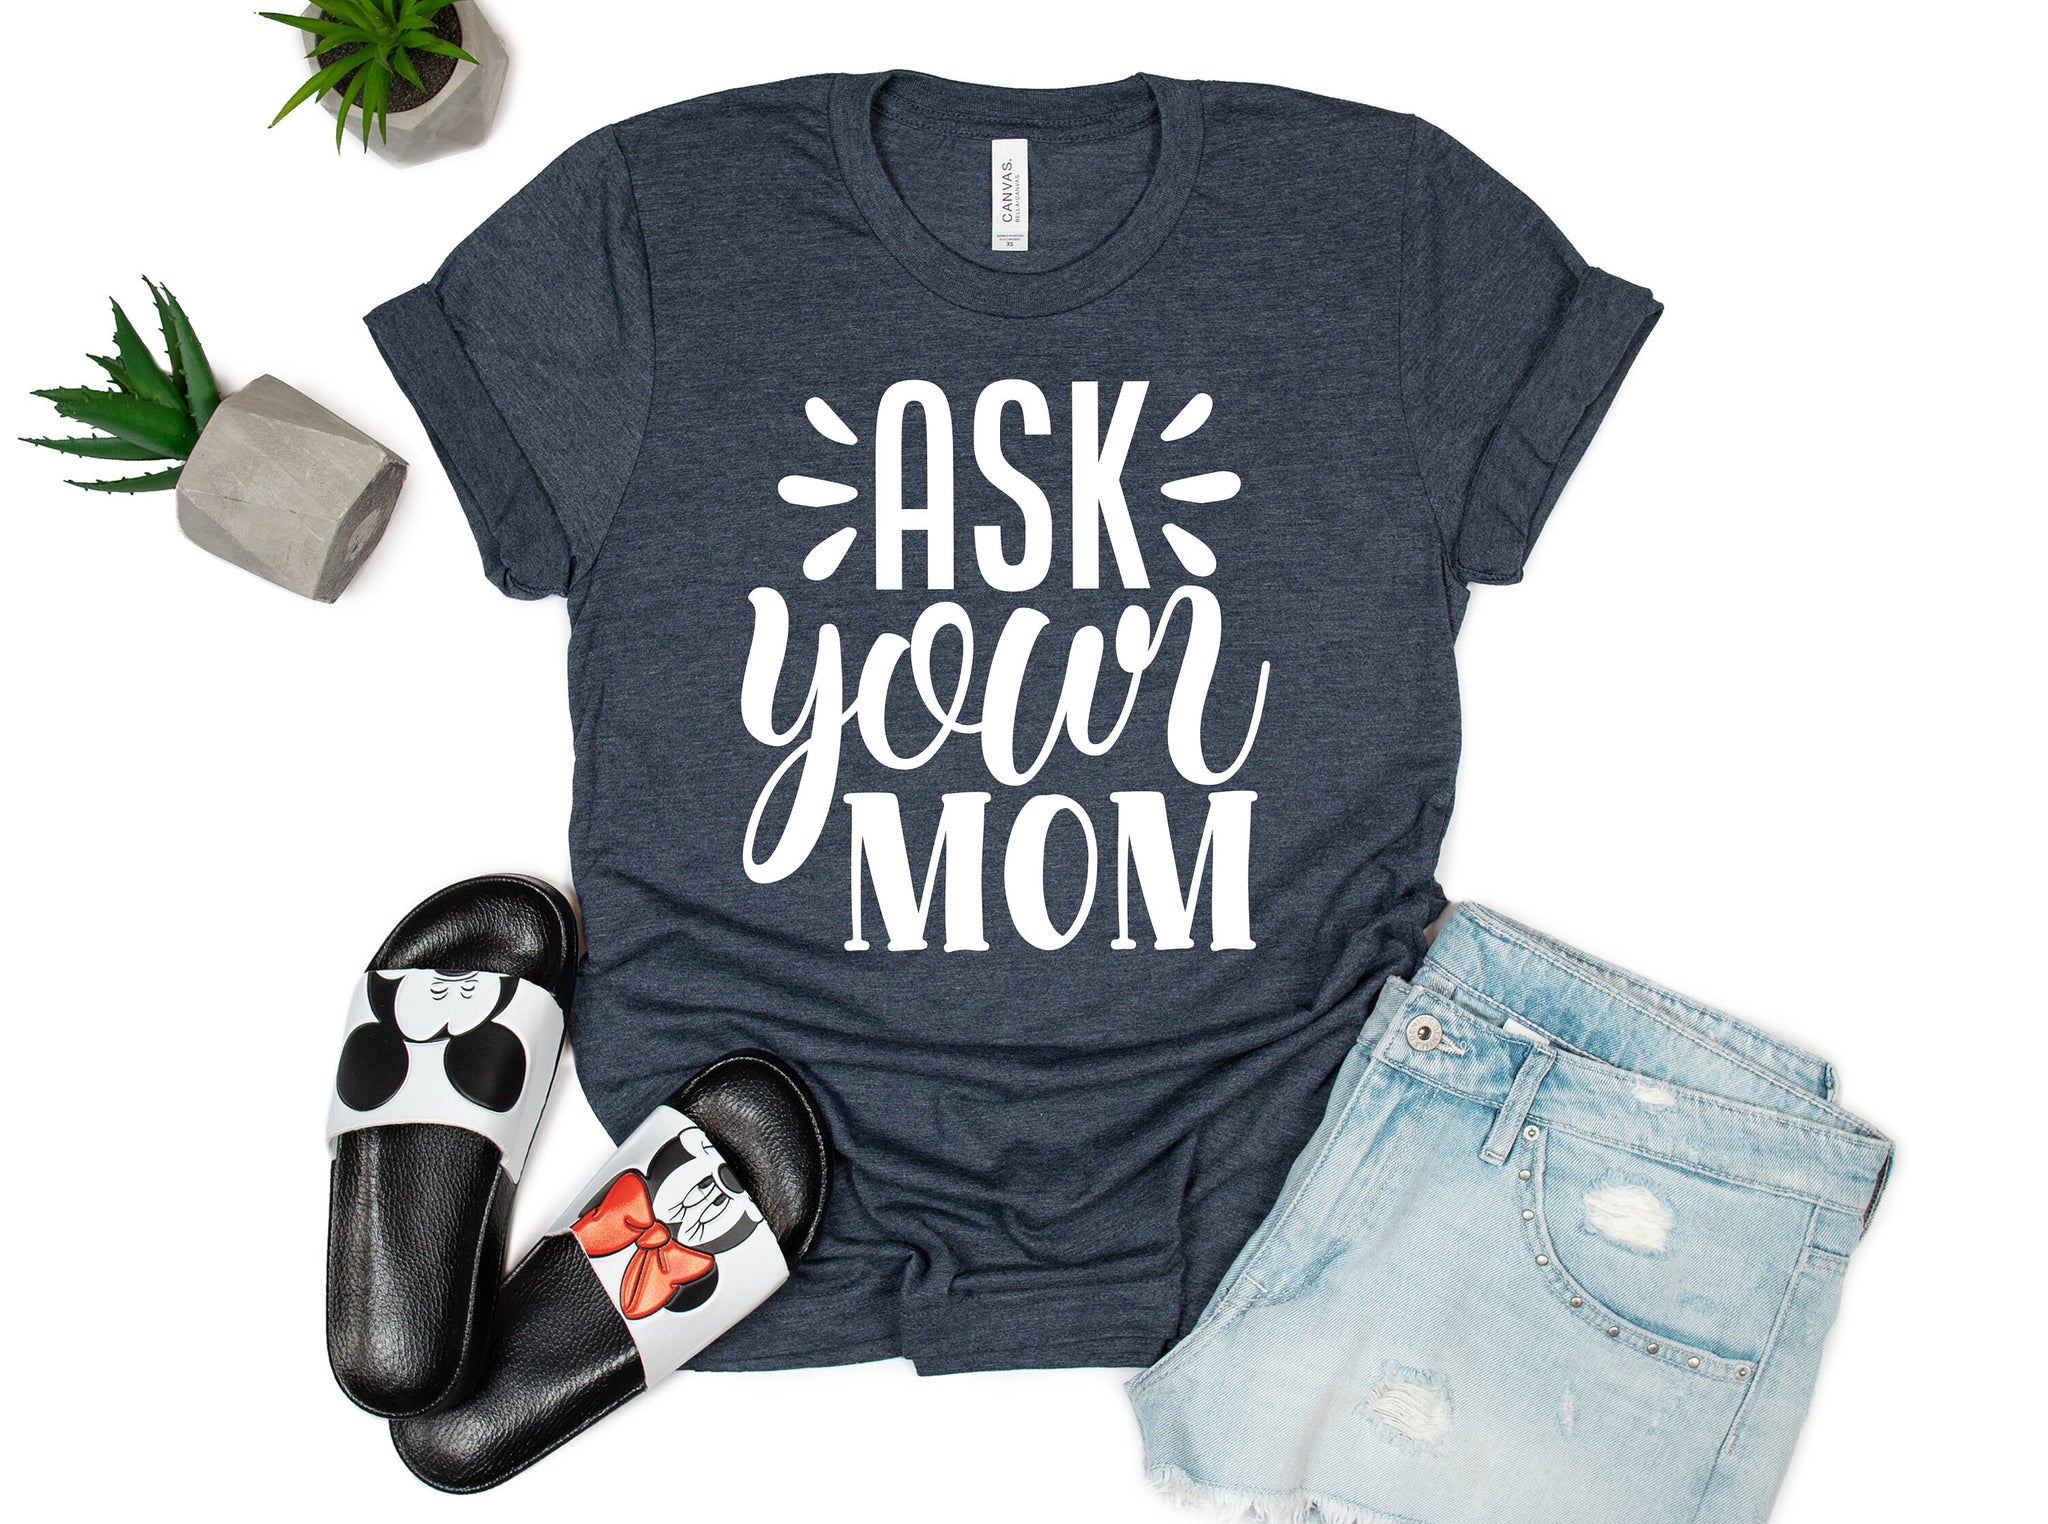 Ask Your Mom, Dad Shirt, Fathers Day Shirt, Funny Dad Jokes Shirt, Like My Father Shirt, Gift for Dady